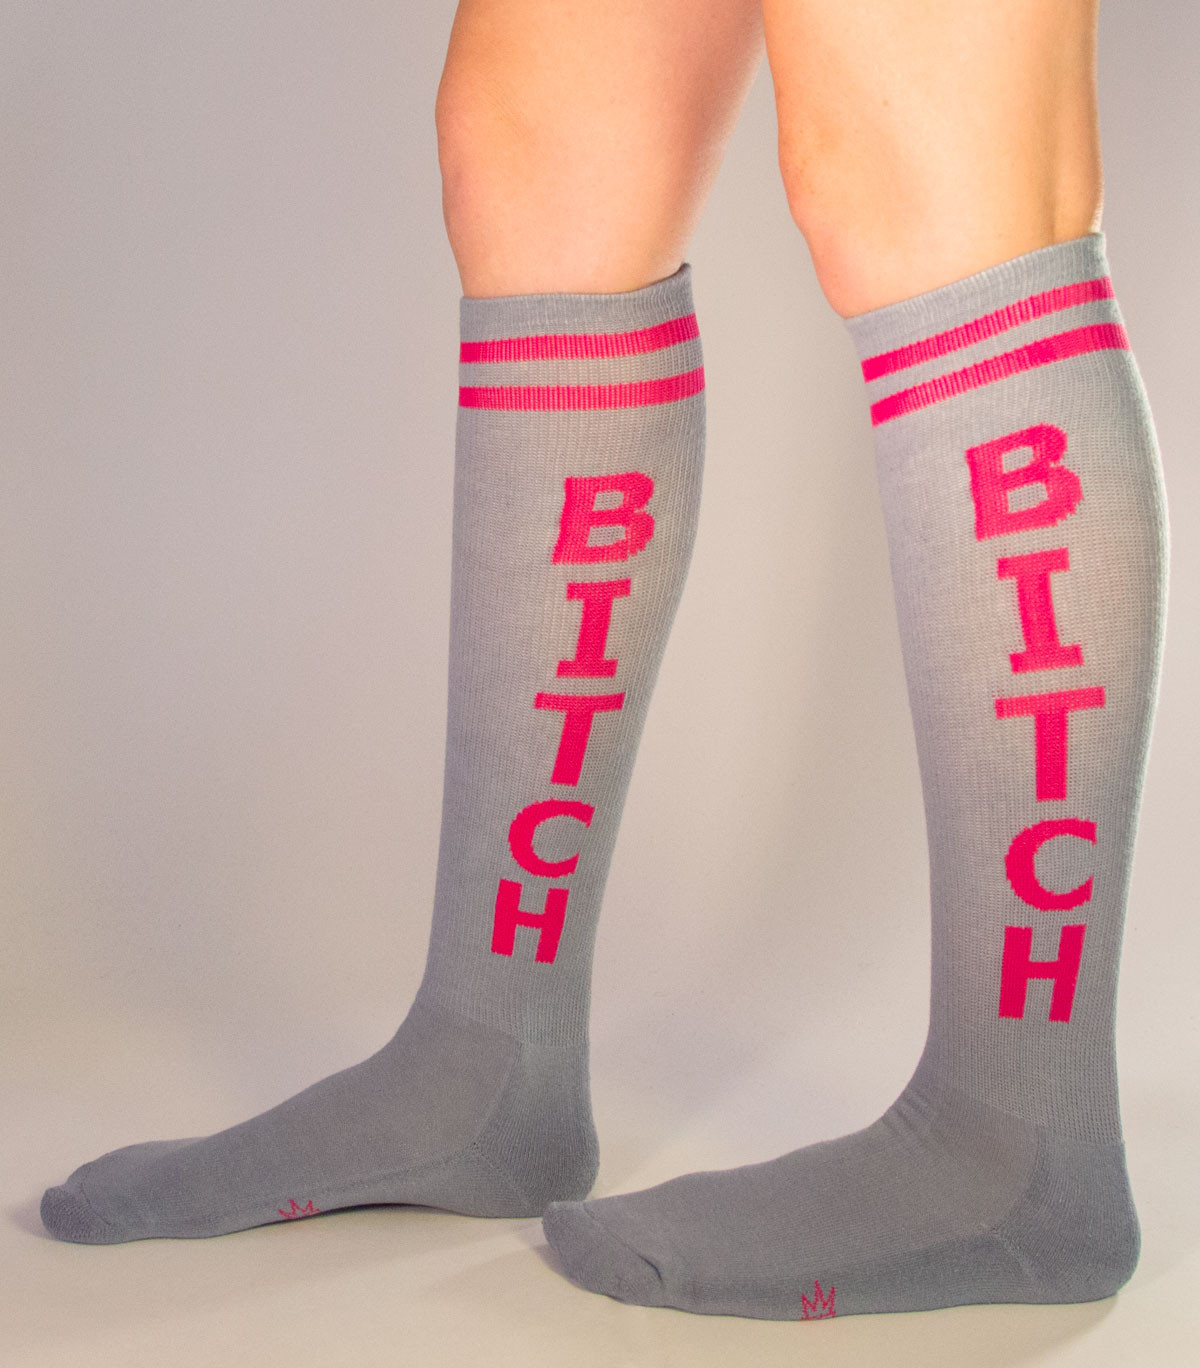 Bitch Socks - $9.95 : , Unique Gifts and Fun Products by  FunSlurp